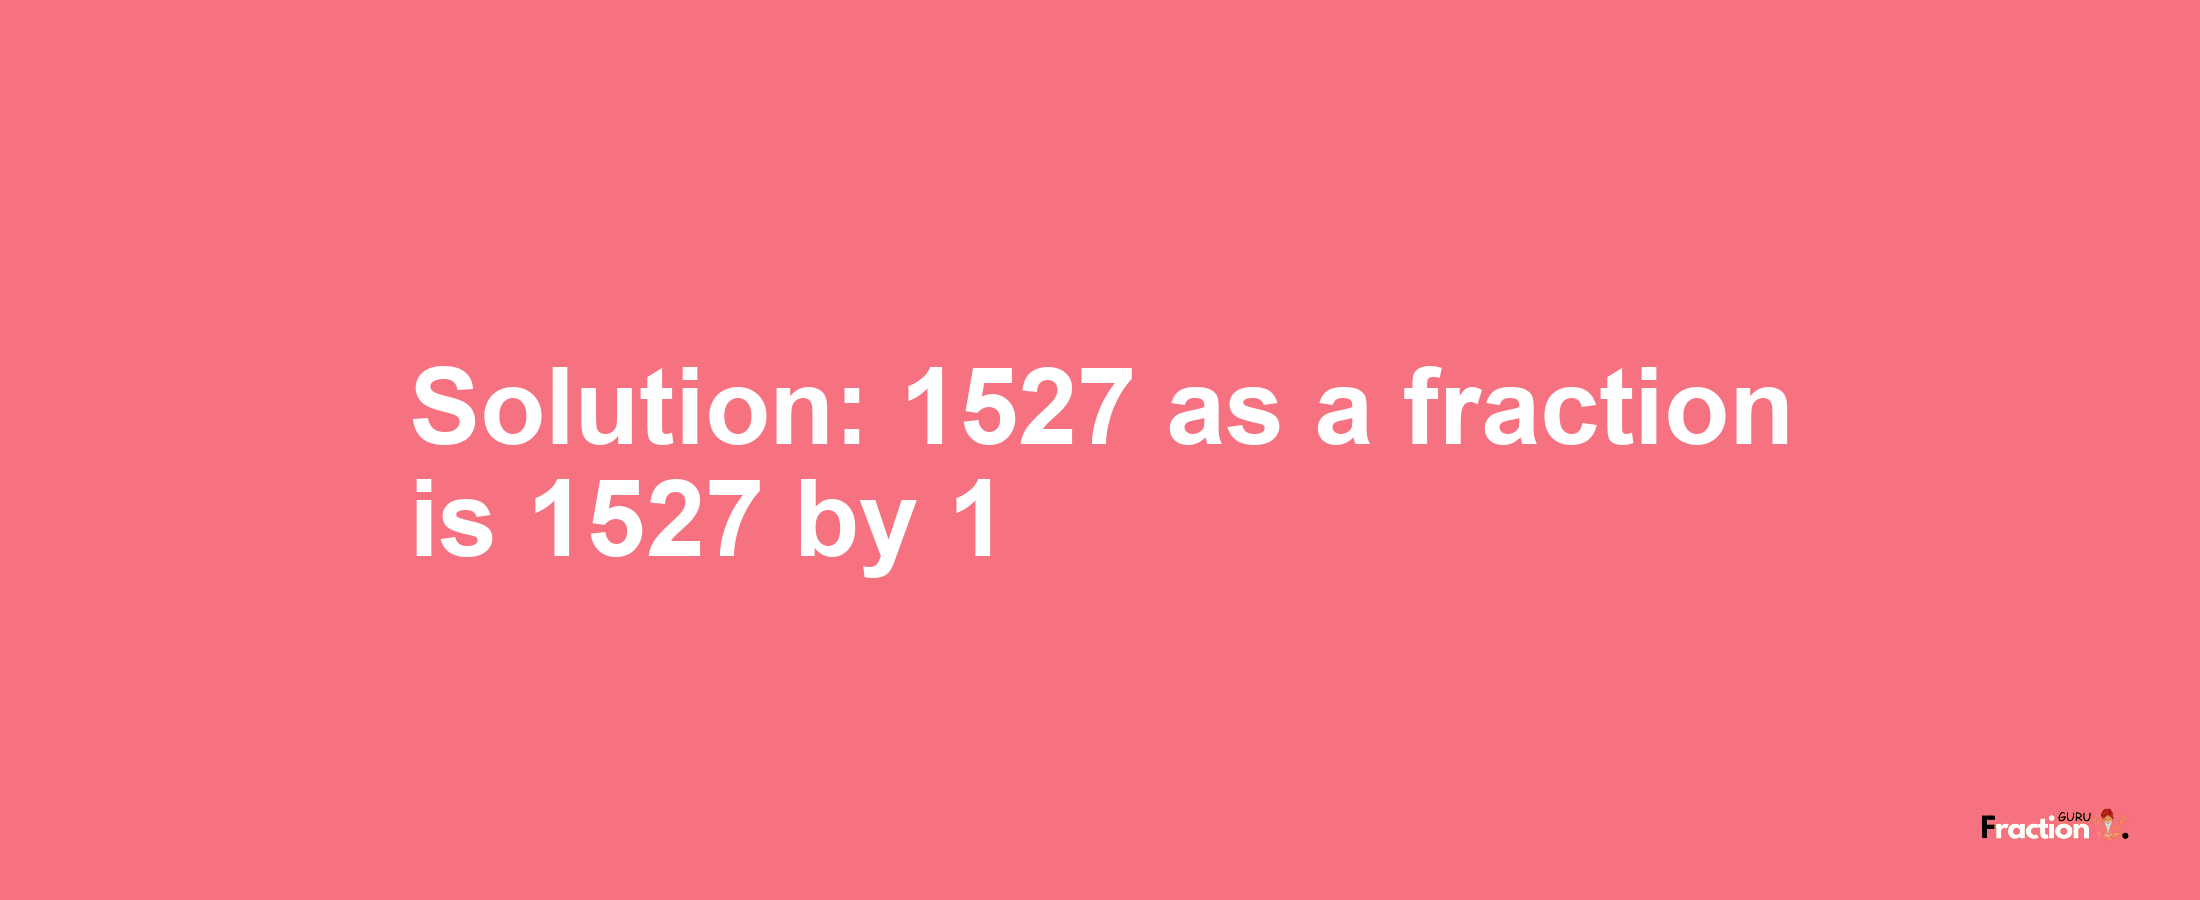 Solution:1527 as a fraction is 1527/1